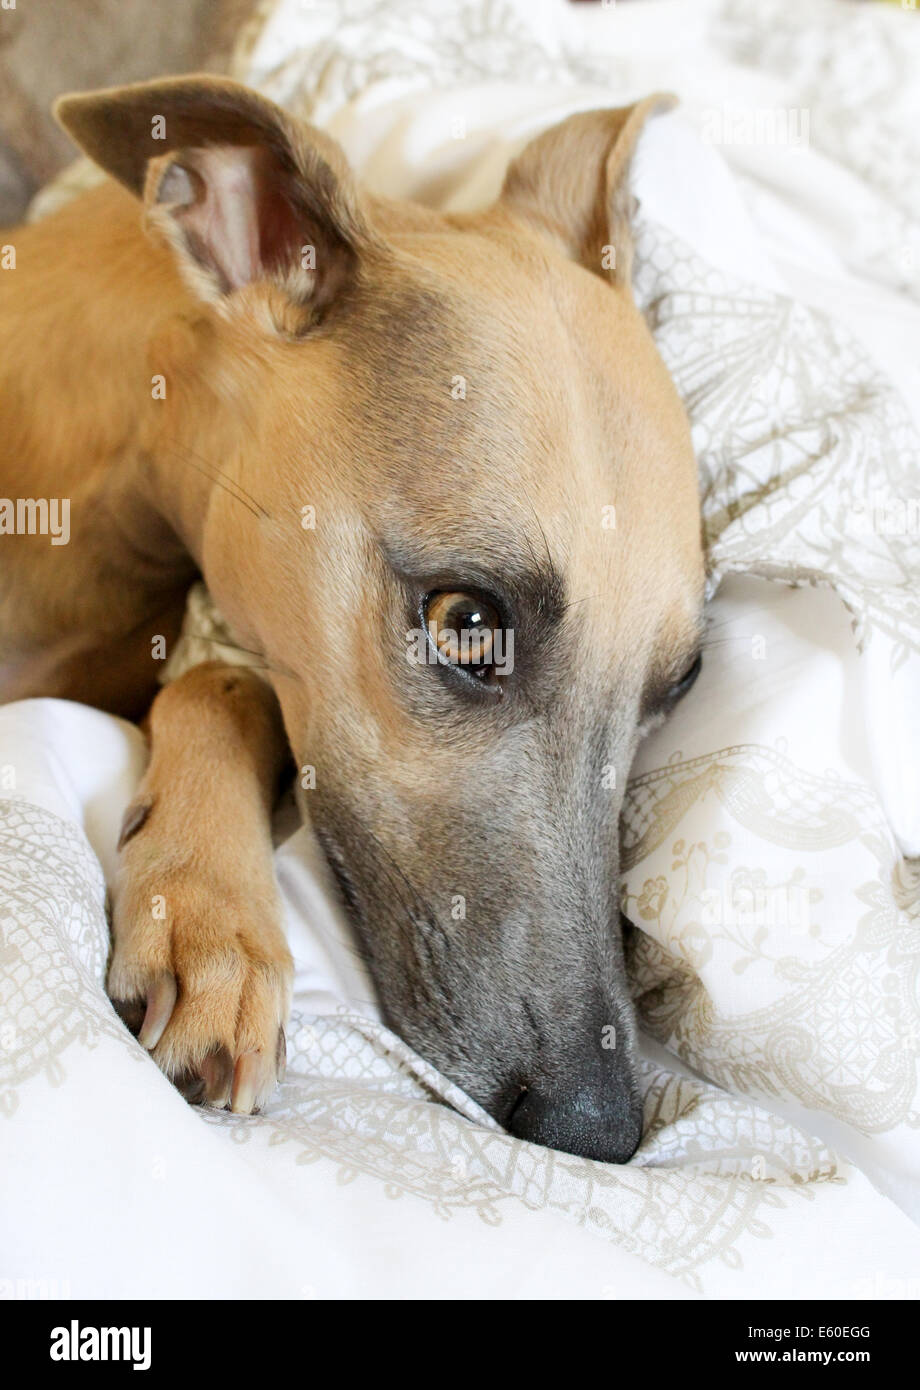 Fawn Whippet High Resolution Stock Photography and Images - Alamy